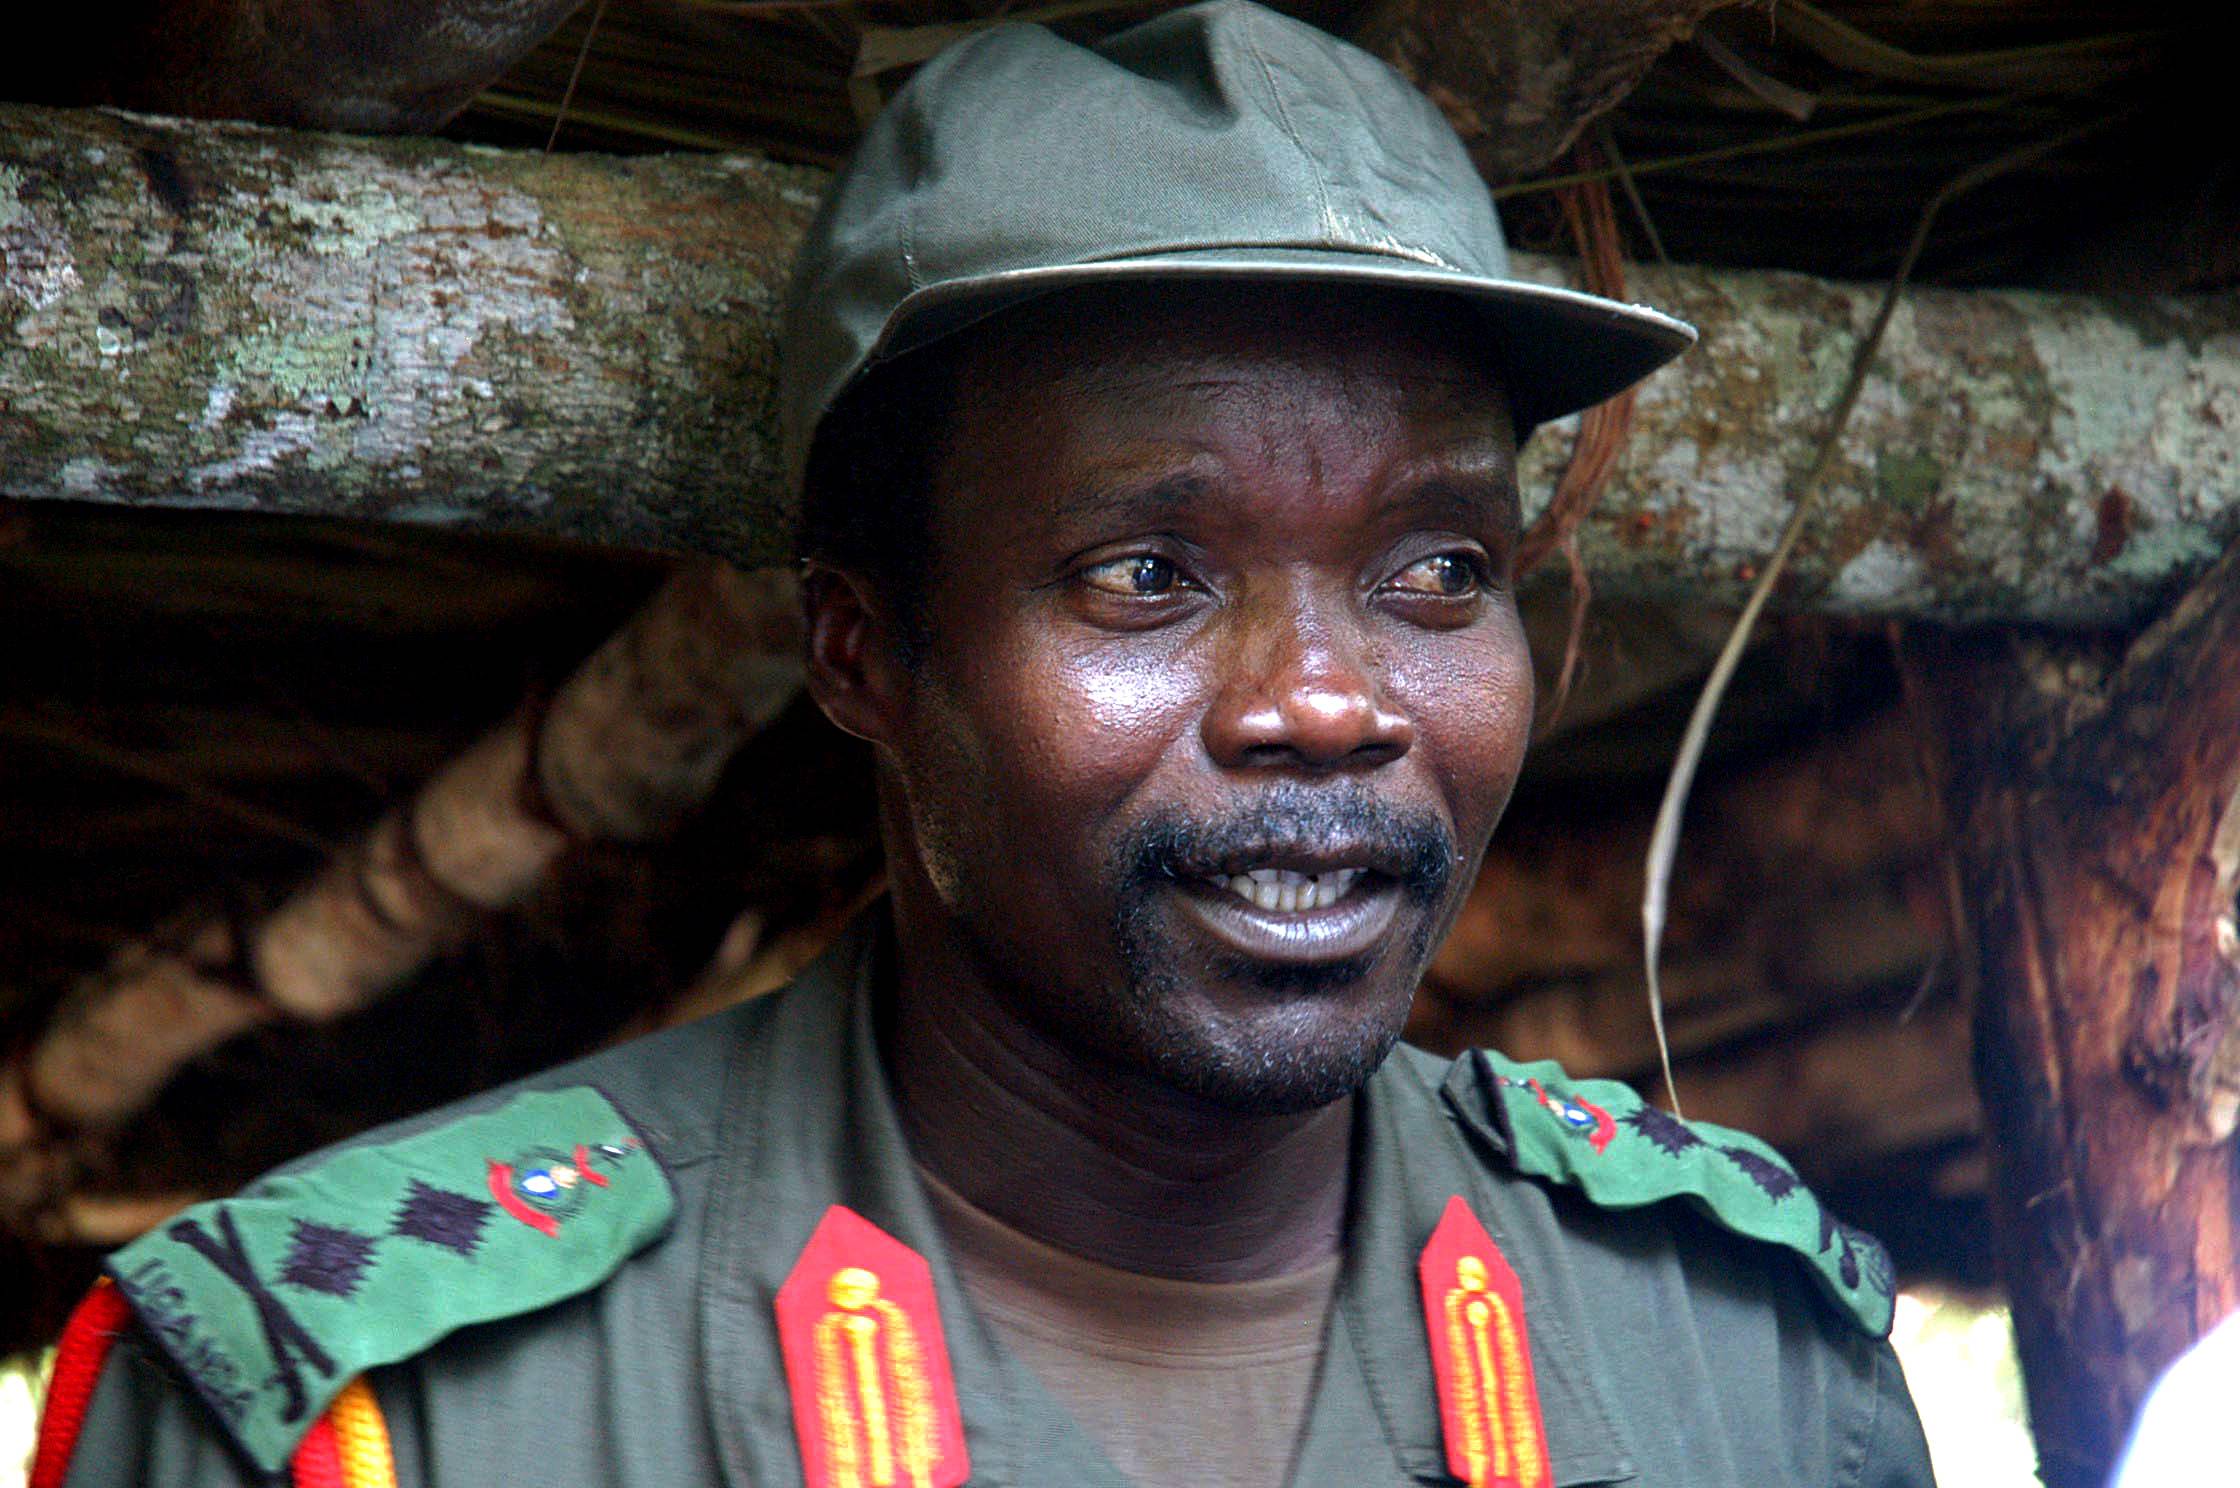 African Union Force to Step Up Hunt for Kony - The&nbsp;African Union&nbsp;announced its plans to send 5,000 soldiers to join the hunt for notorious rebel leader&nbsp;Joseph Kony, a new mission that comes amid a wildly popular Internet campaign targeting the leader of the Lord's Resistance Army.(Photo: AP)